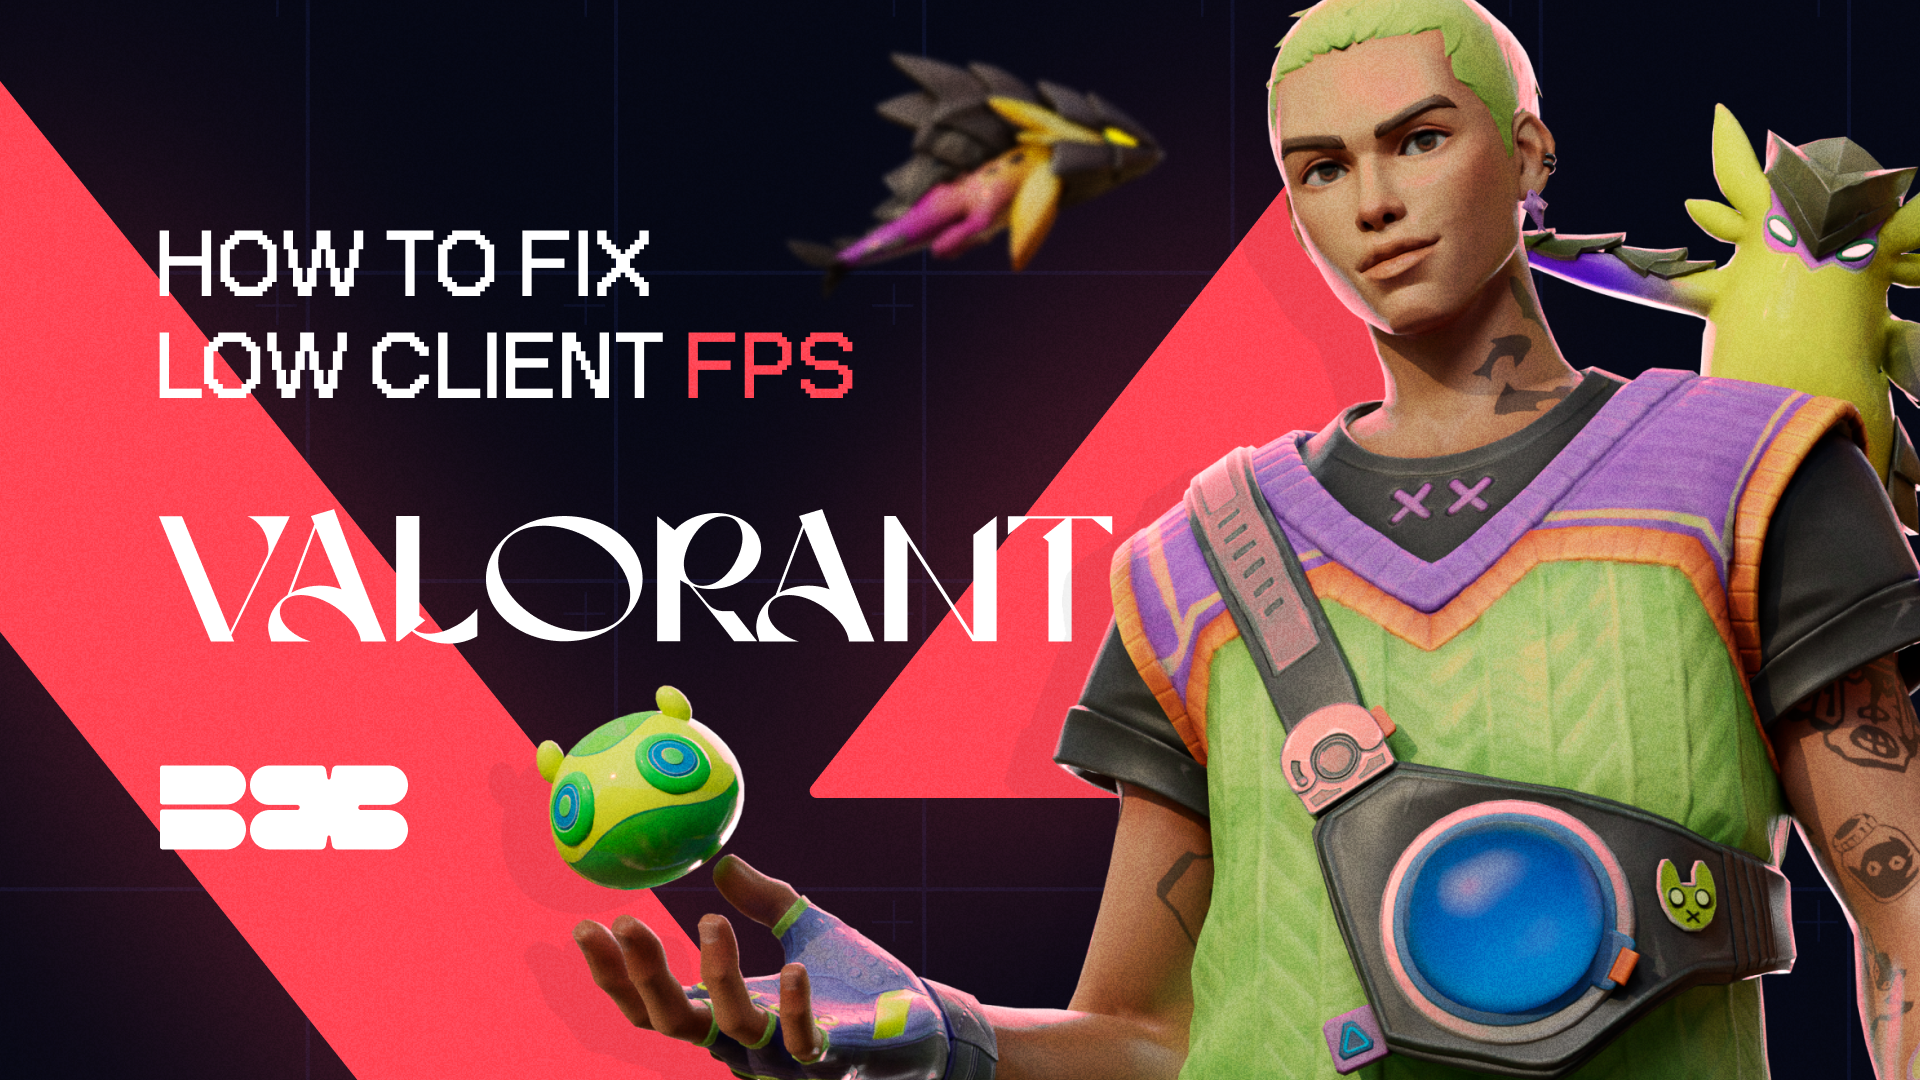 The Best Valorant Graphics Settings (High FPS!) 